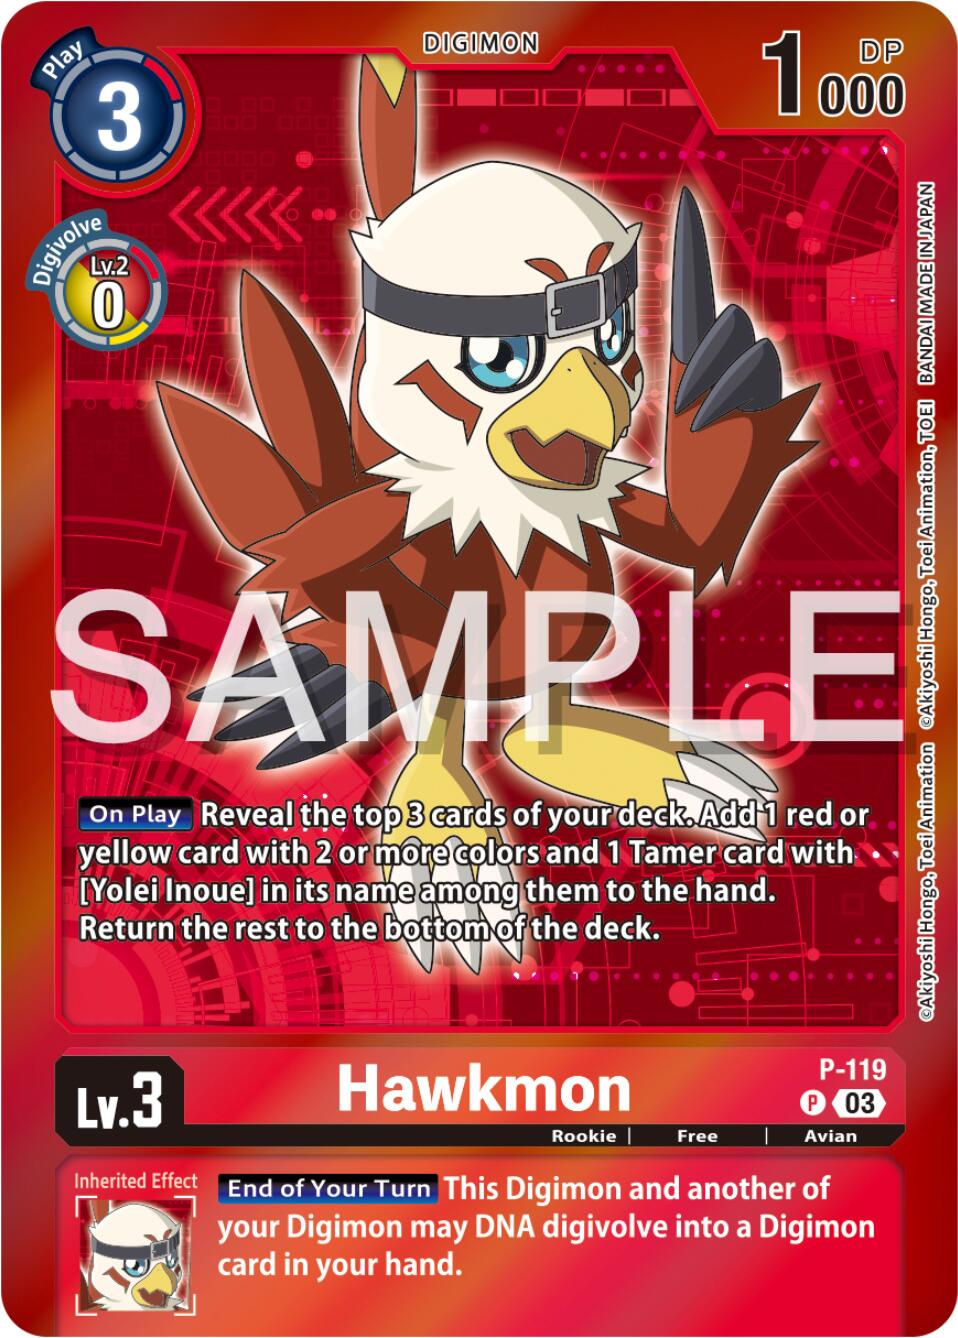 Hawkmon [P-119] - P-119 (Digimon Adventure Box 2024) [Promotional Cards] | Total Play